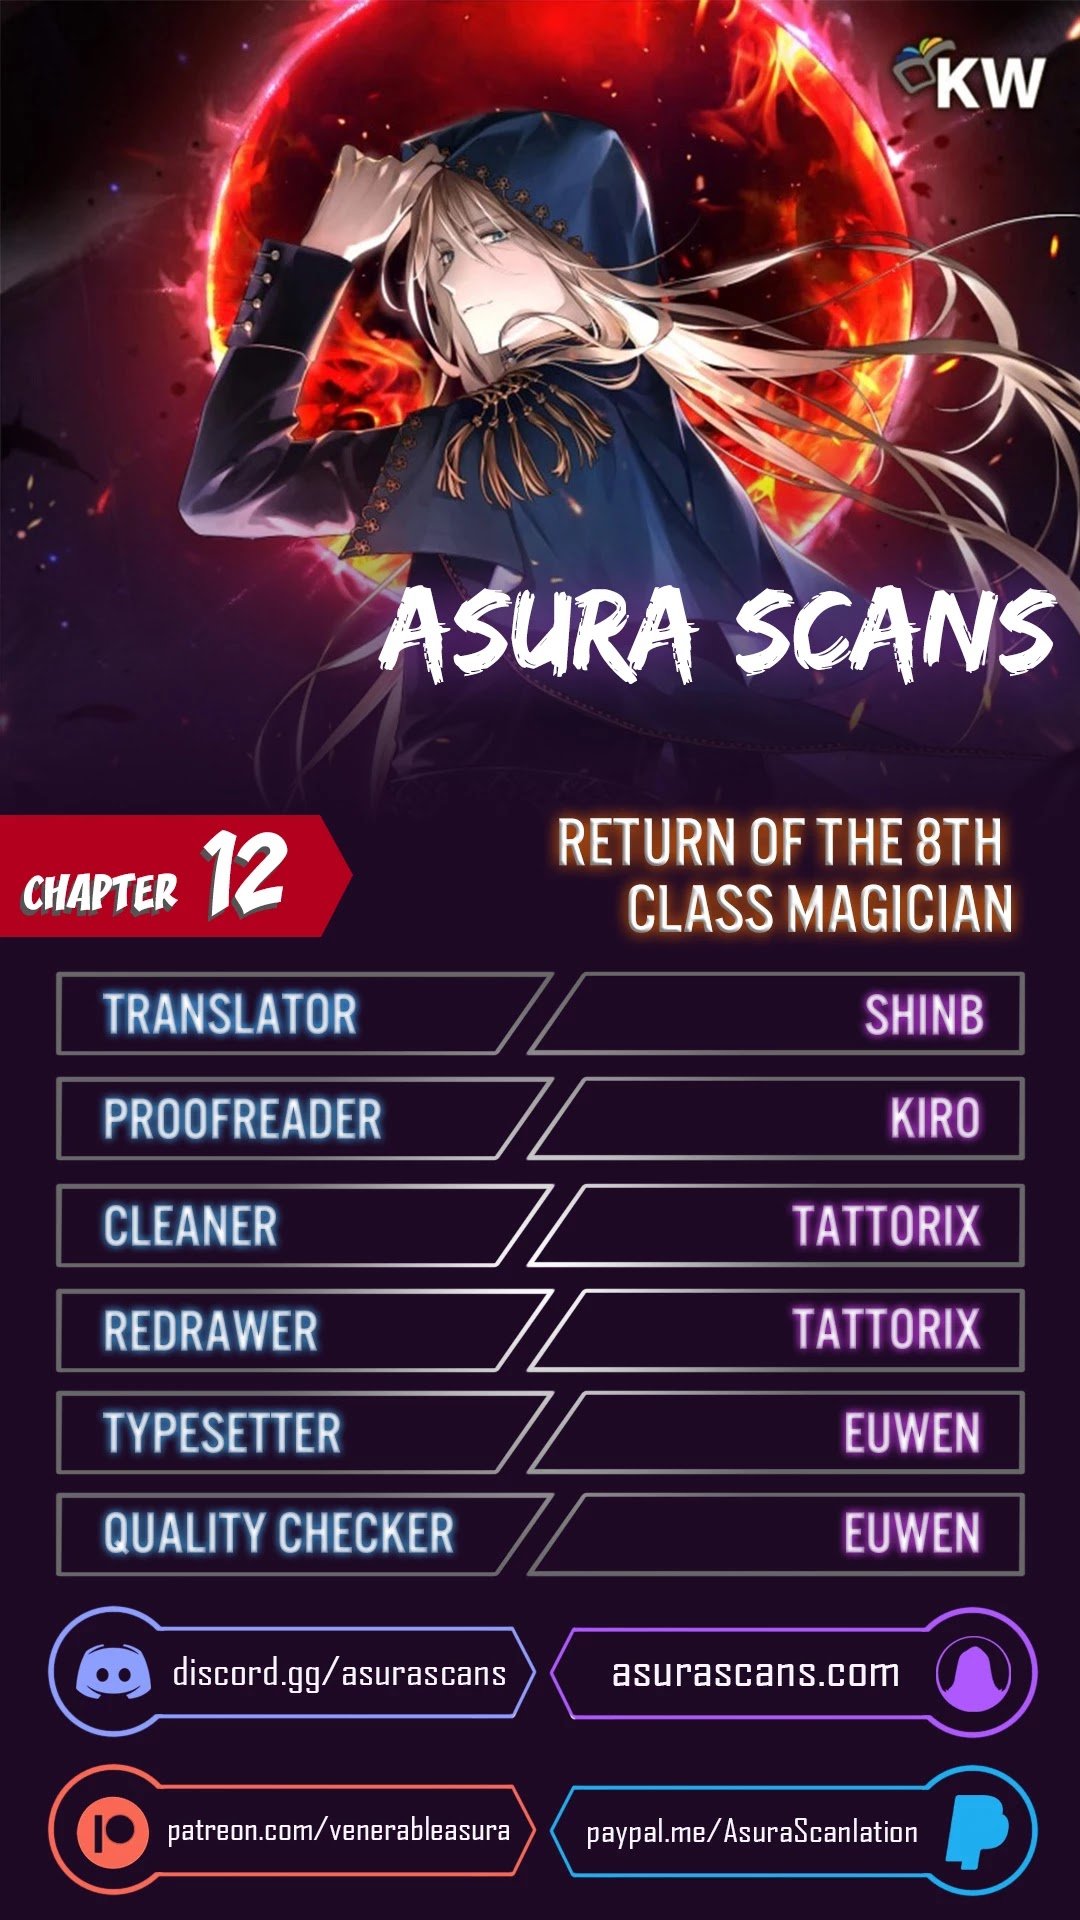 Return of the 8th class Magician chapter 12